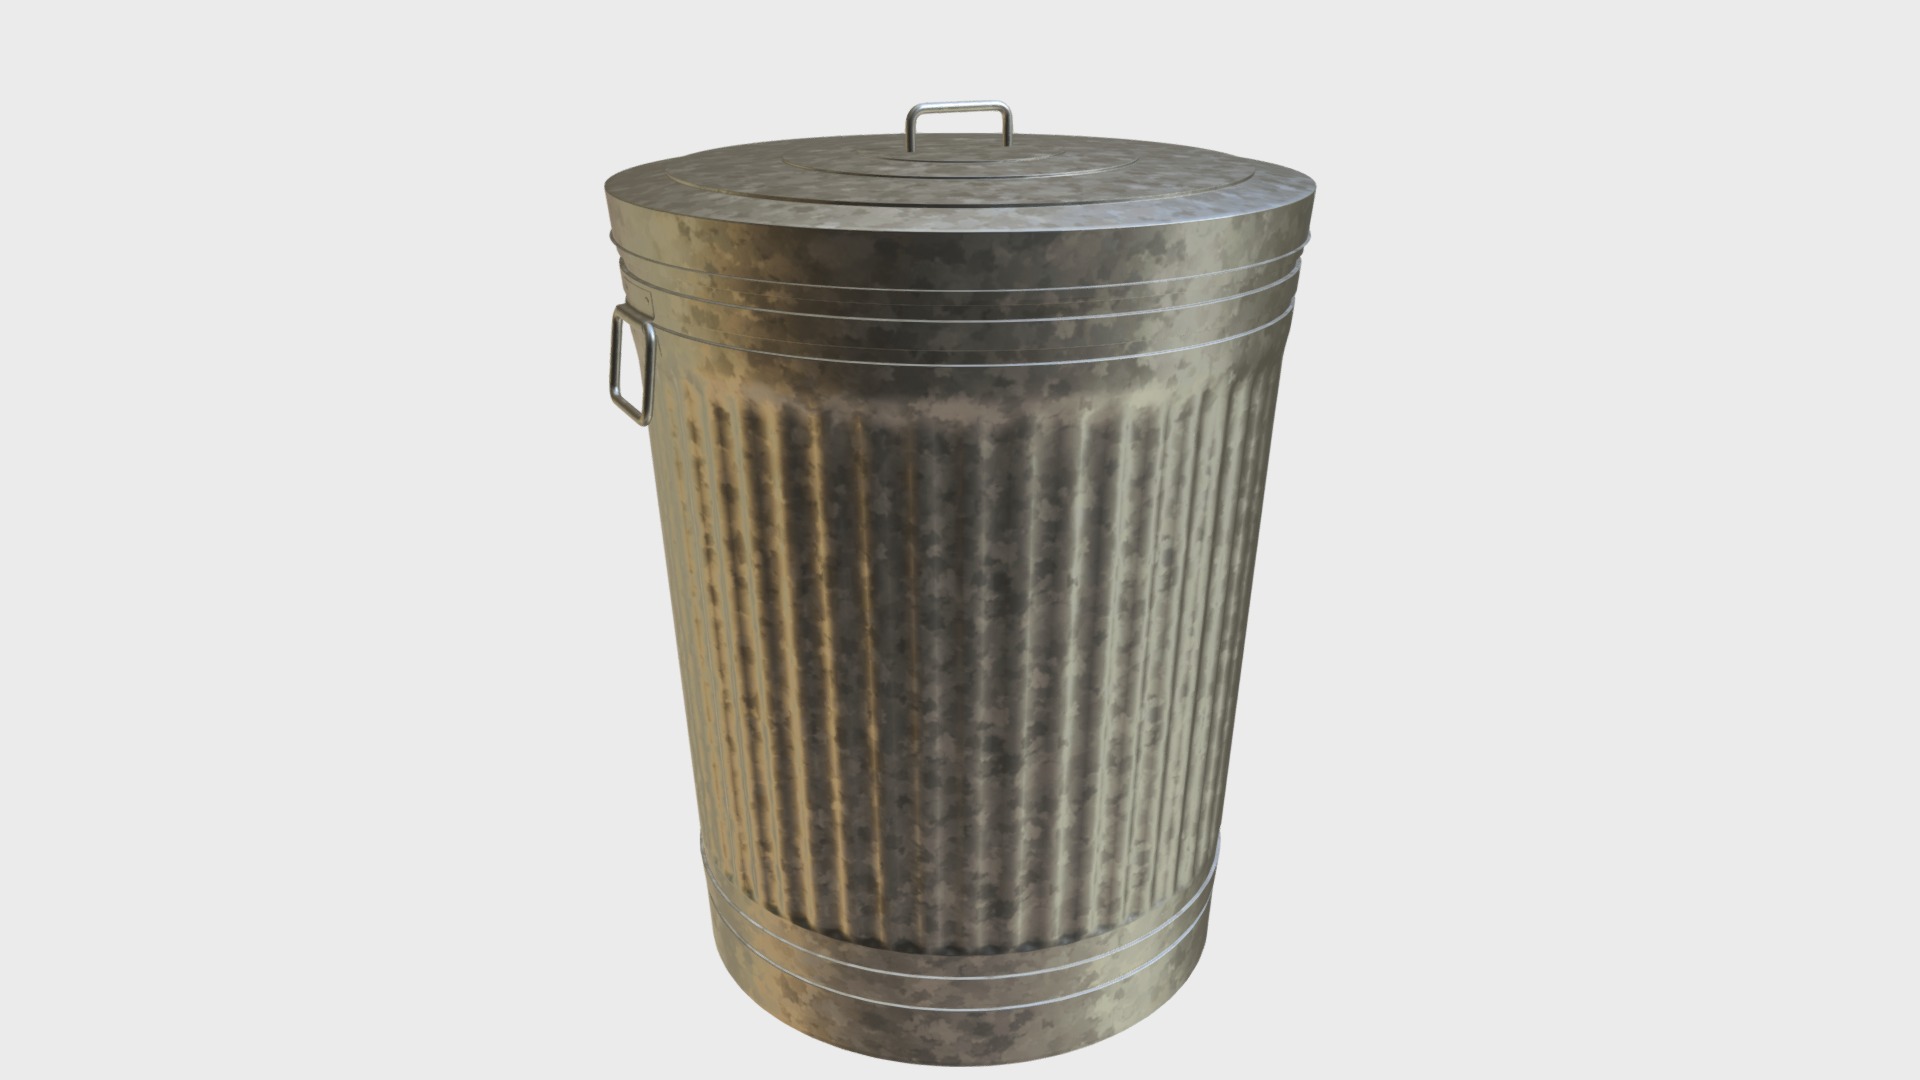 3D model Metallic trash can closed - This is a 3D model of the Metallic trash can closed. The 3D model is about a metal can with a handle.